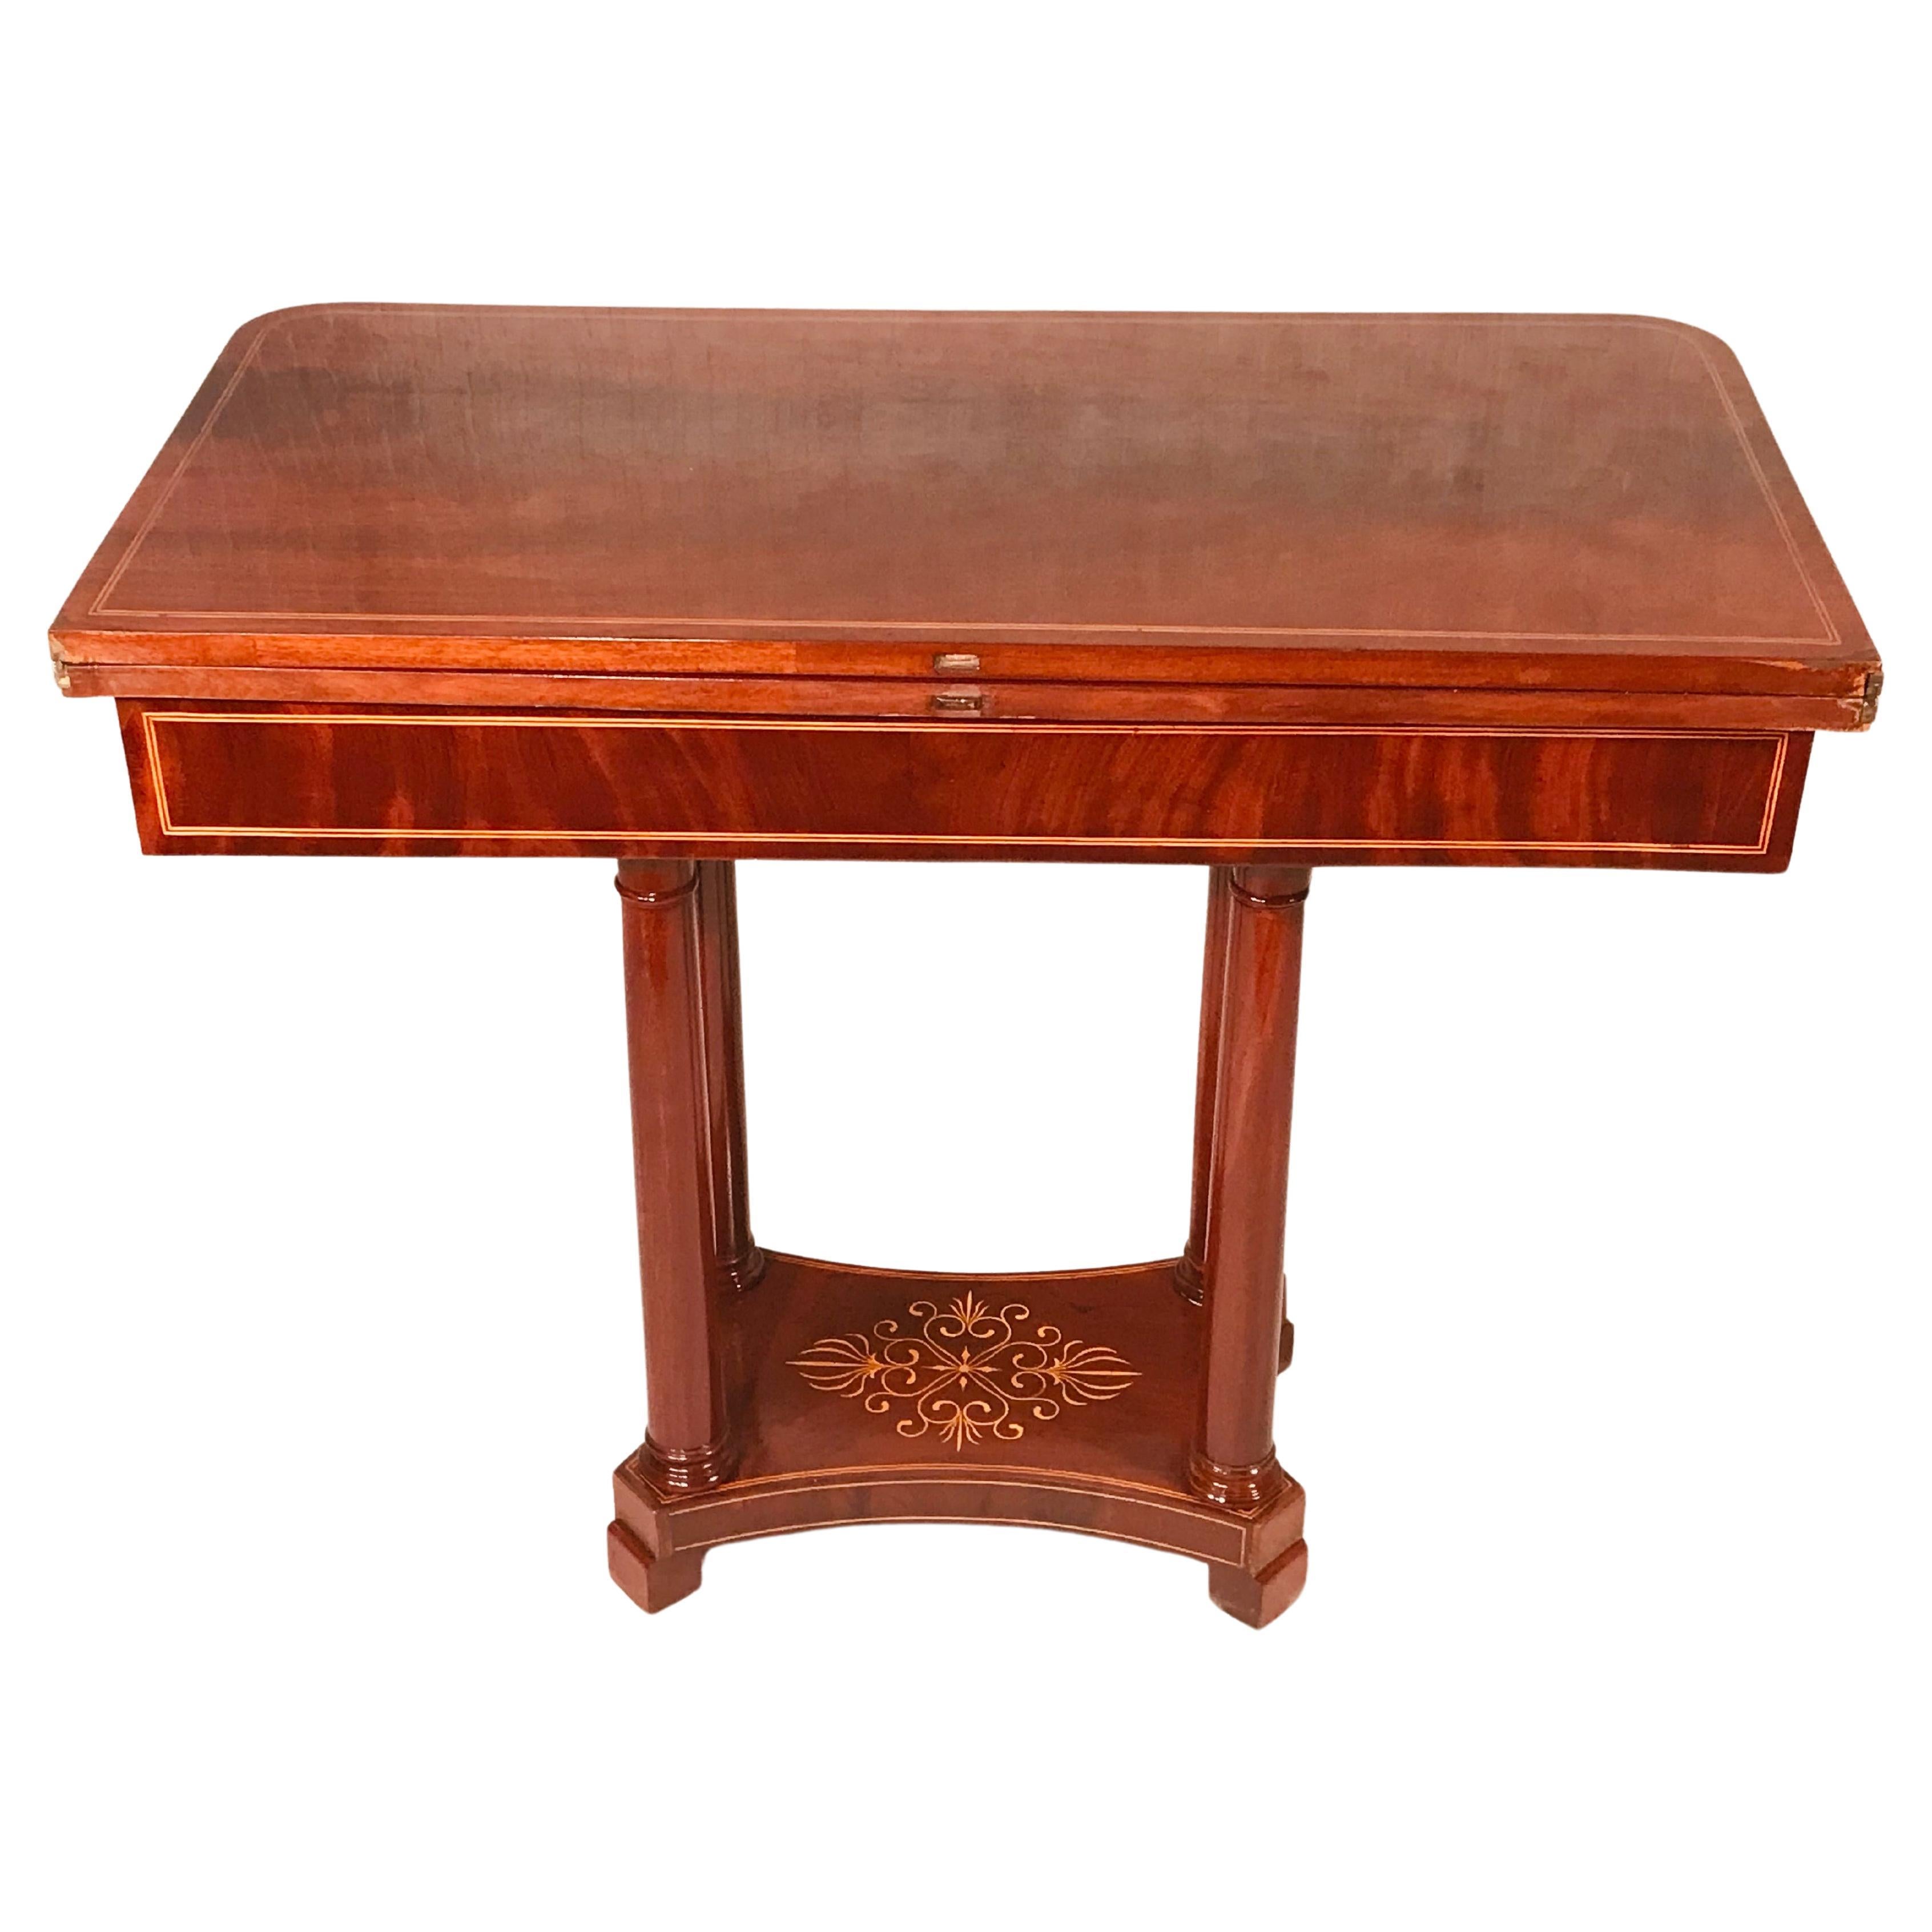 Restauration French 19th century Game Table, Restoration Period 1830-40 For Sale